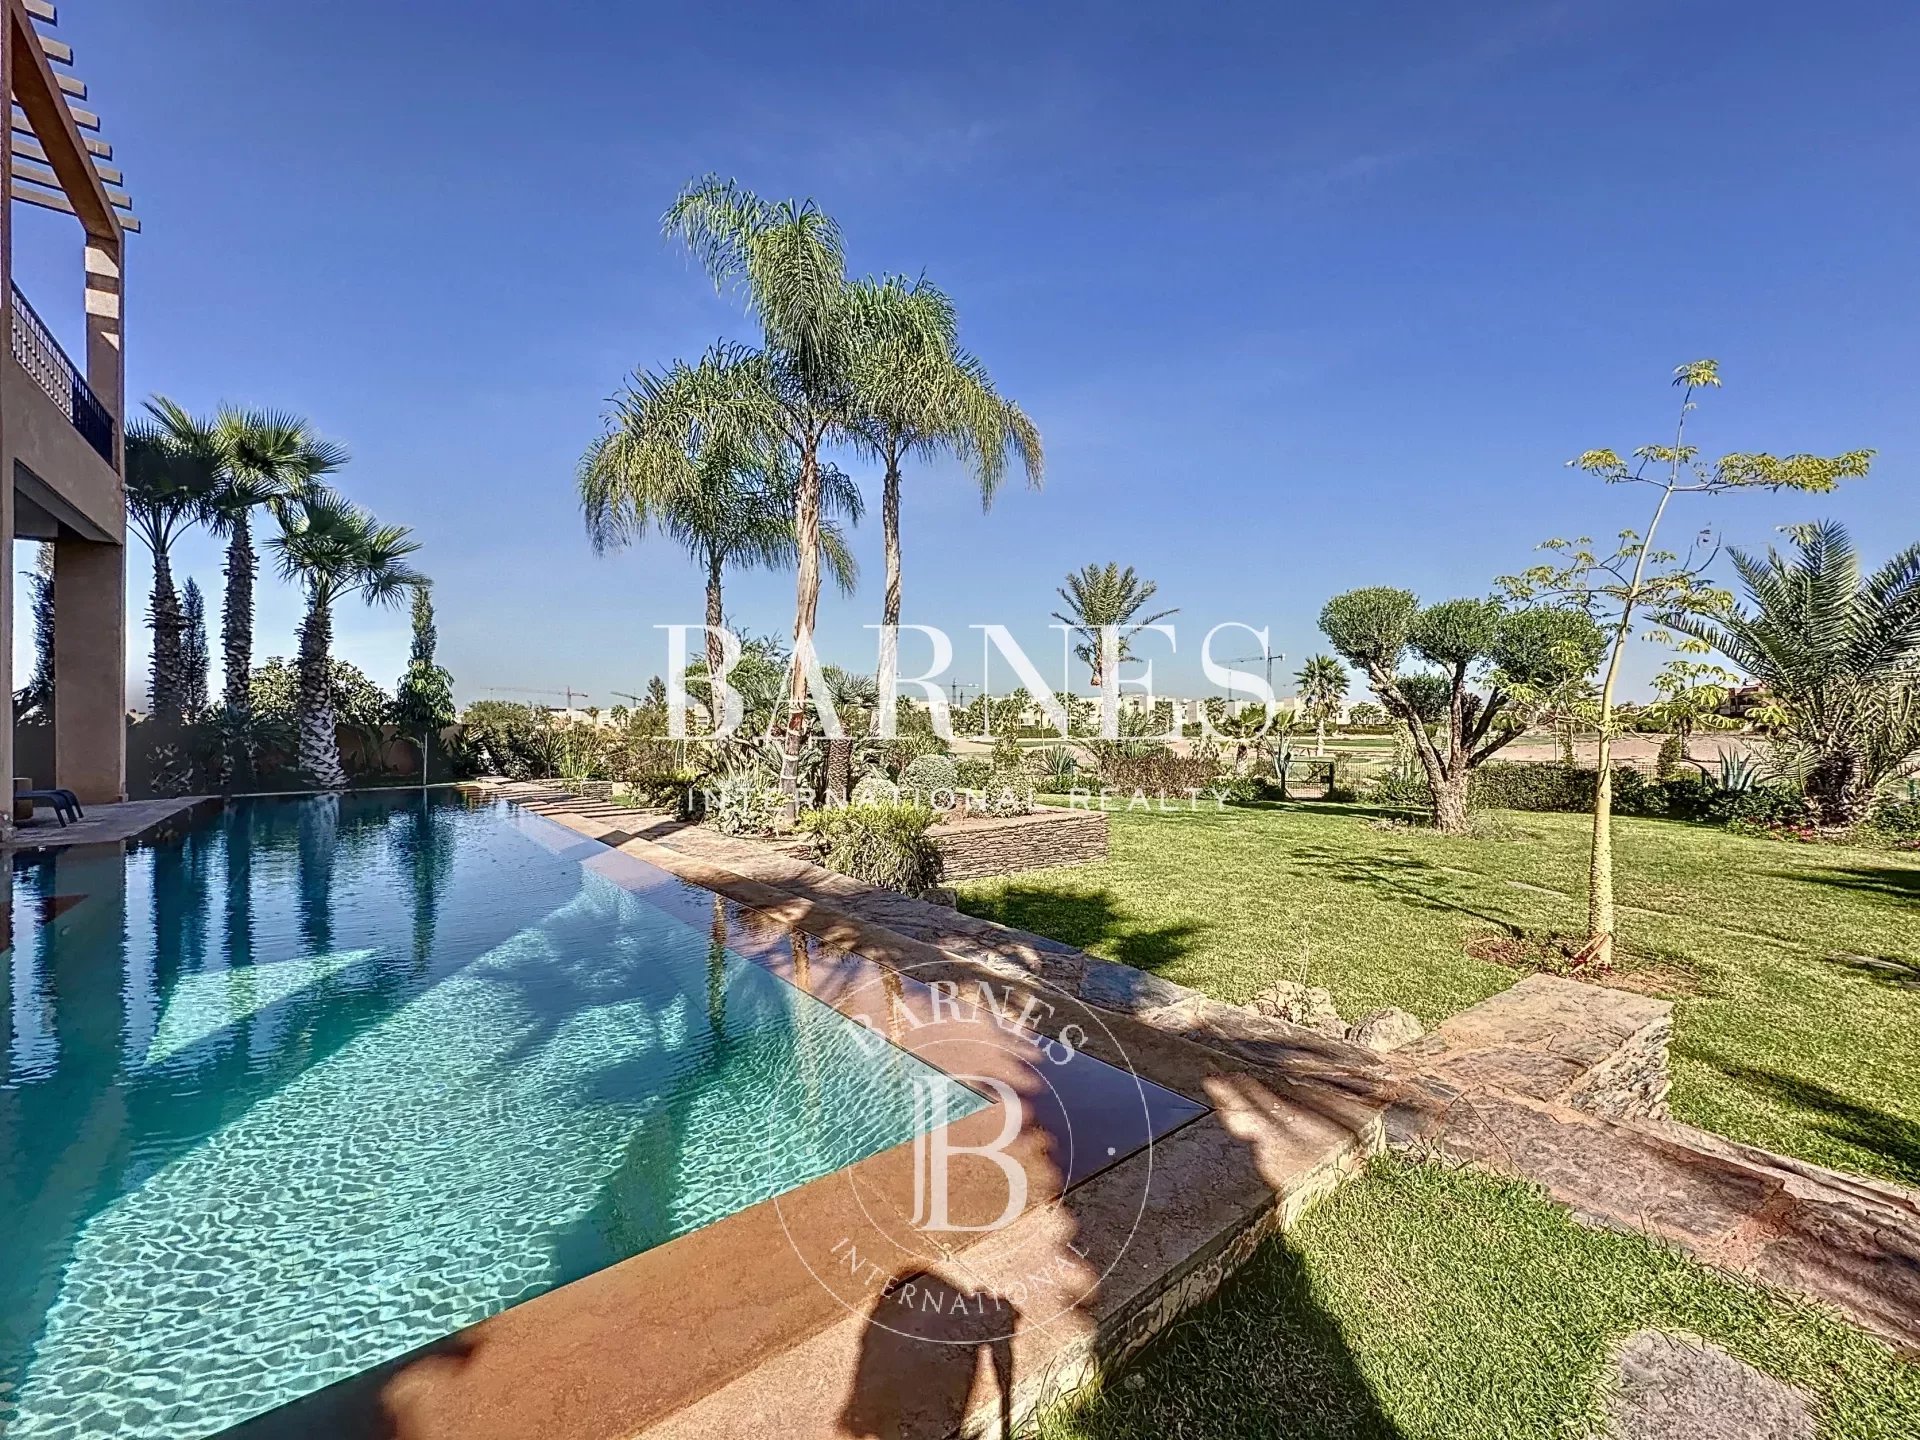 4-suite villa with a refined Moroccan style, located directly on the golf course.